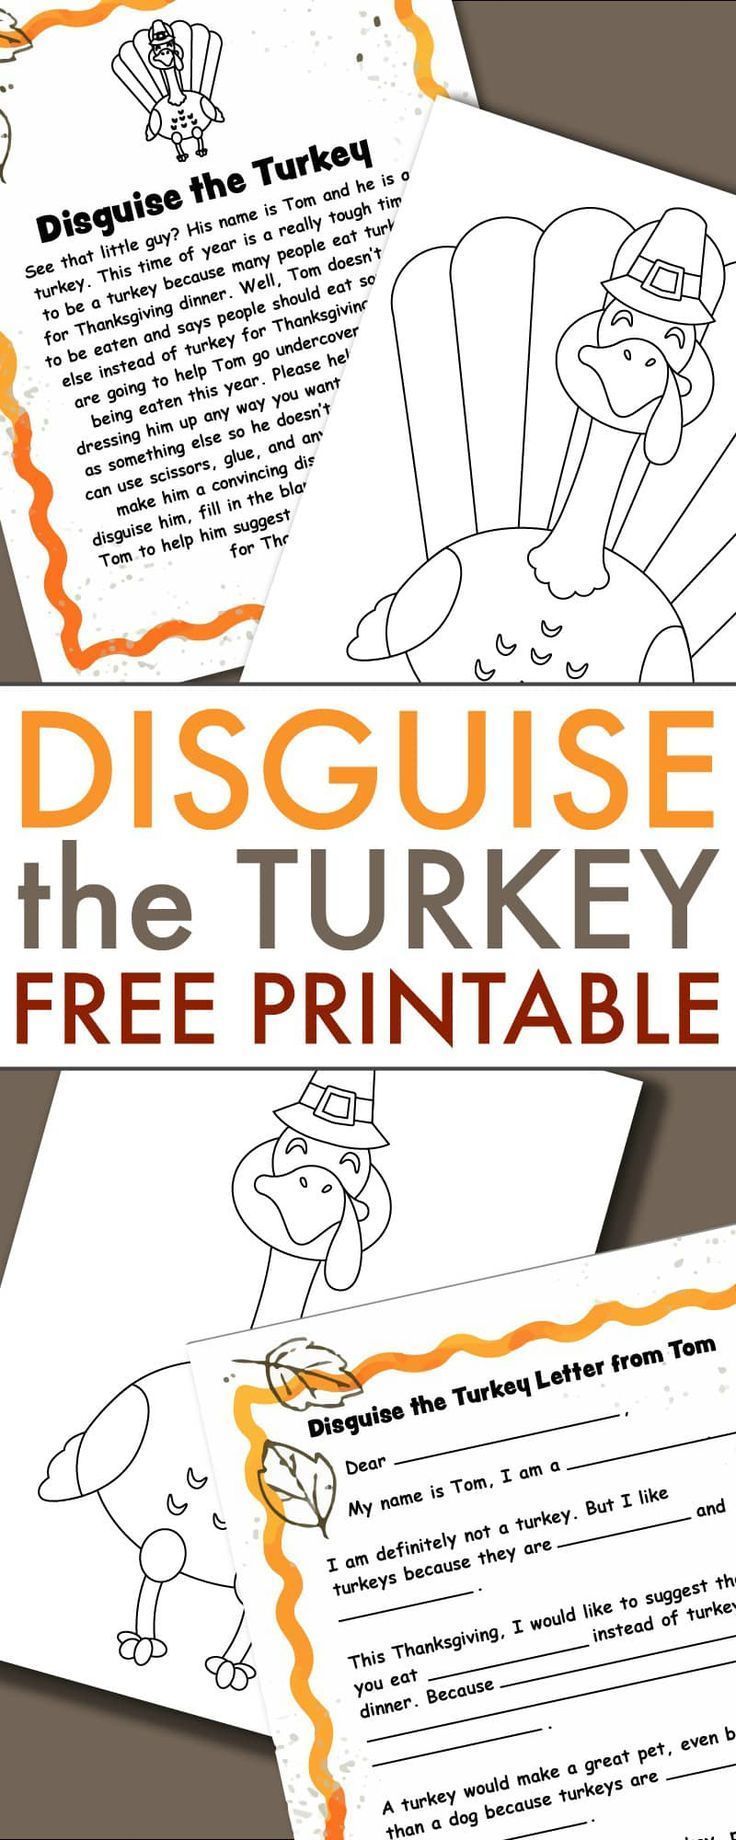 A Turkey in Disguise Project Free Printable Template -